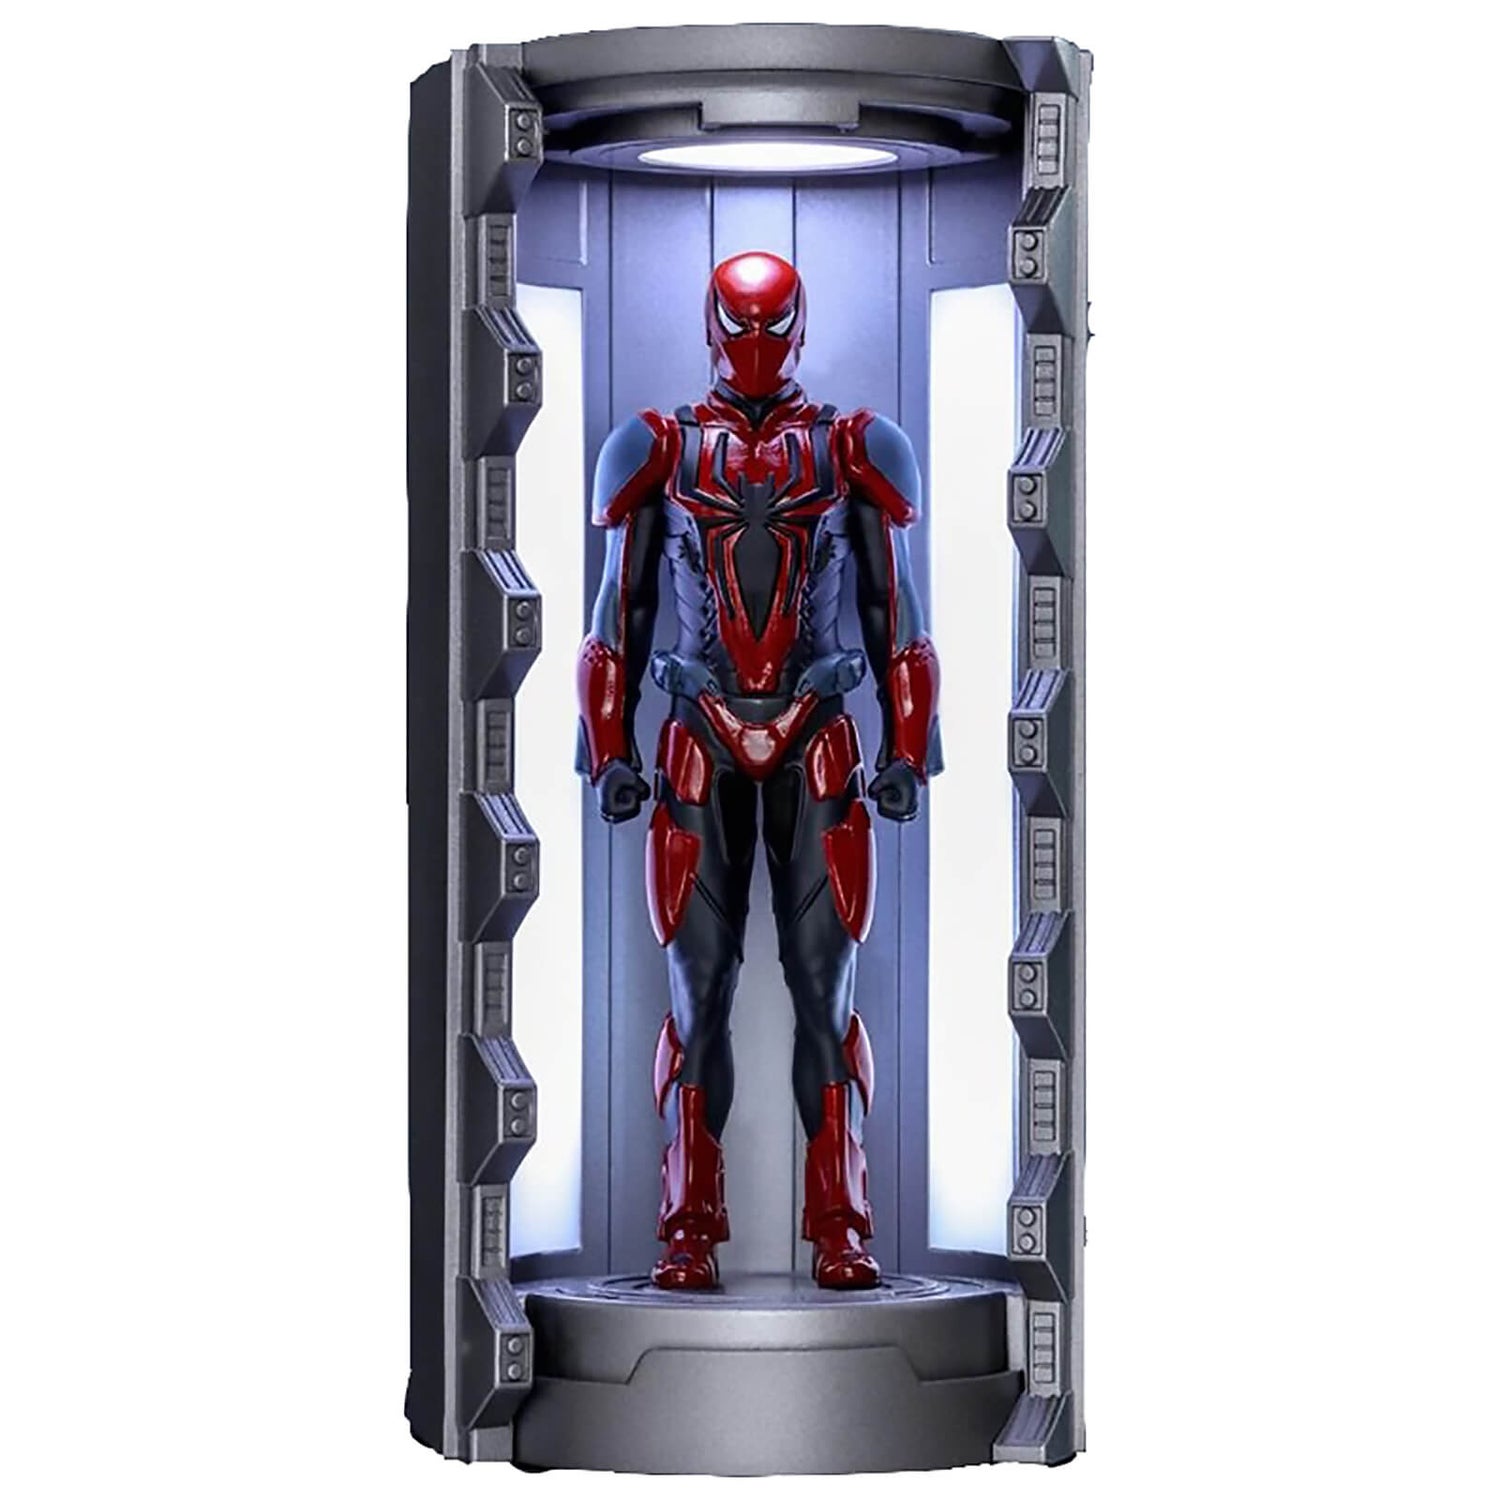 Hot Toys Marvel's Spider-Man Mk III Suit with Spider-Man Armory Video Game Masterpiece Compact Miniature Figure